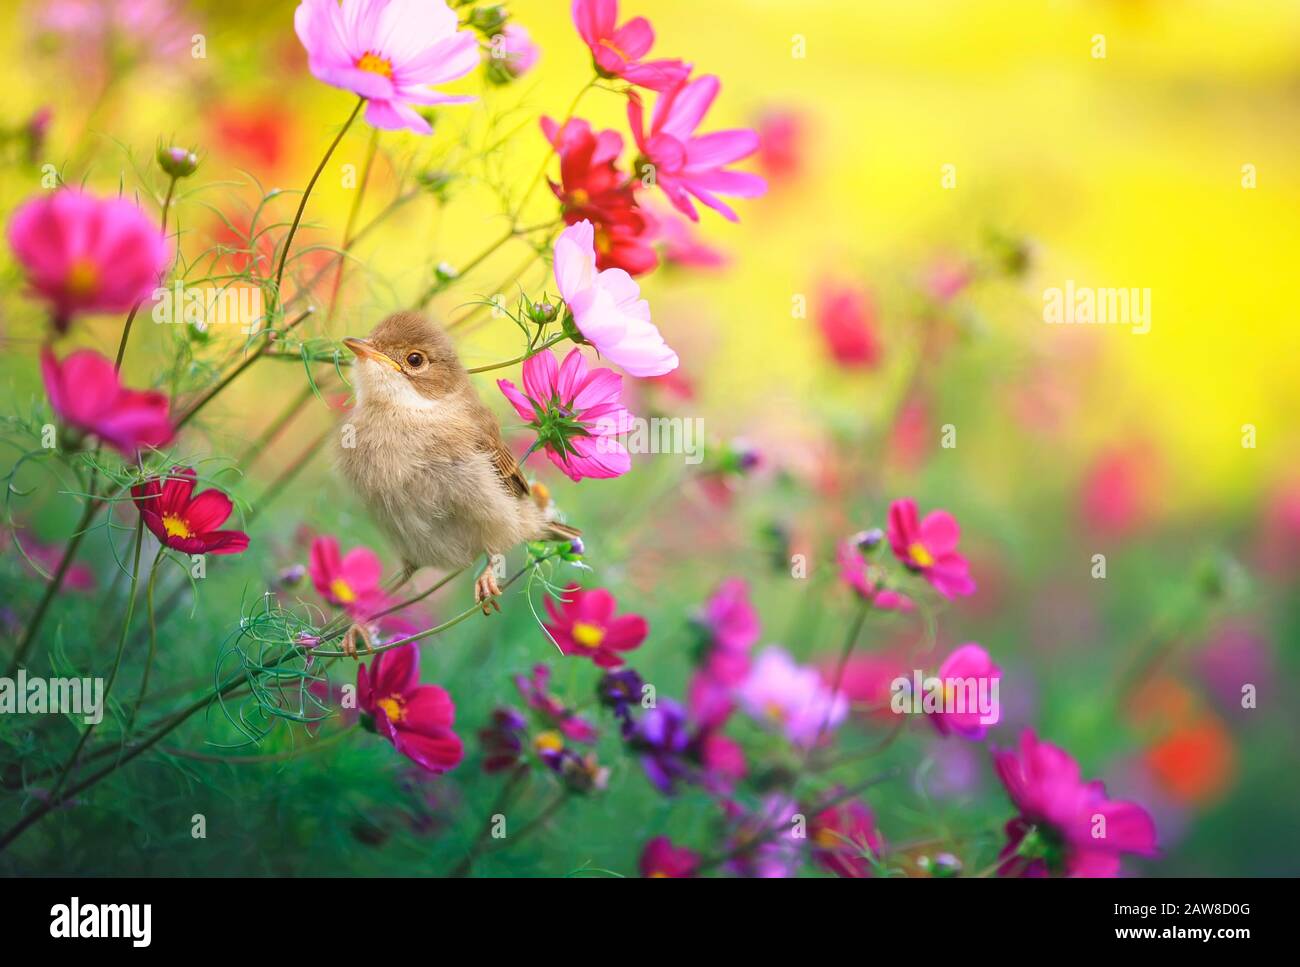 wallpaper flowers and birds